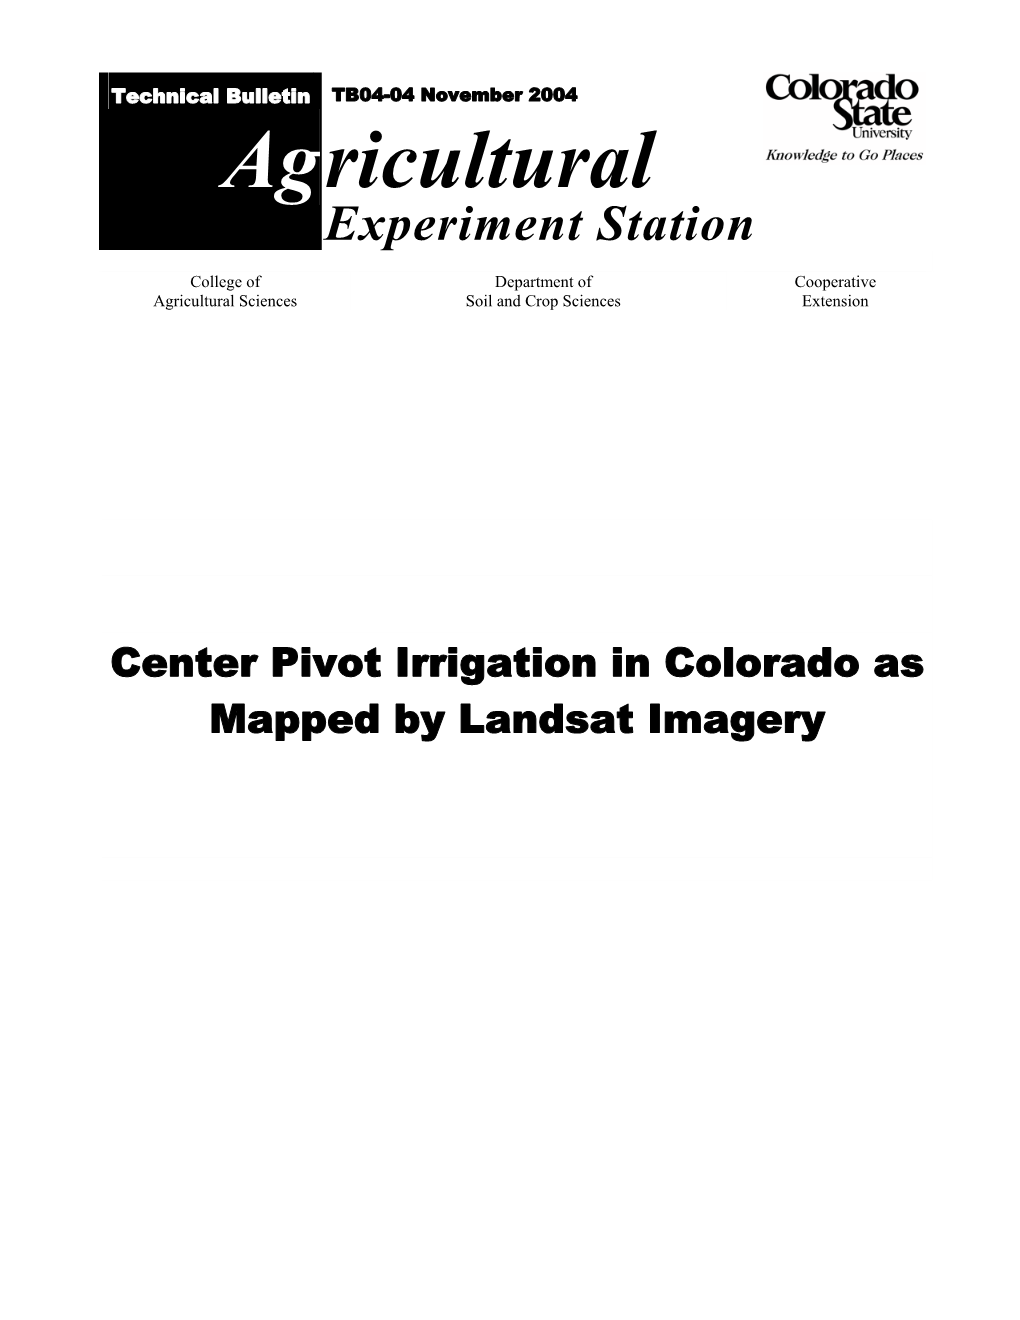 Center Pivot Irrigation in Colorado As Mapped by Landsat Imagery